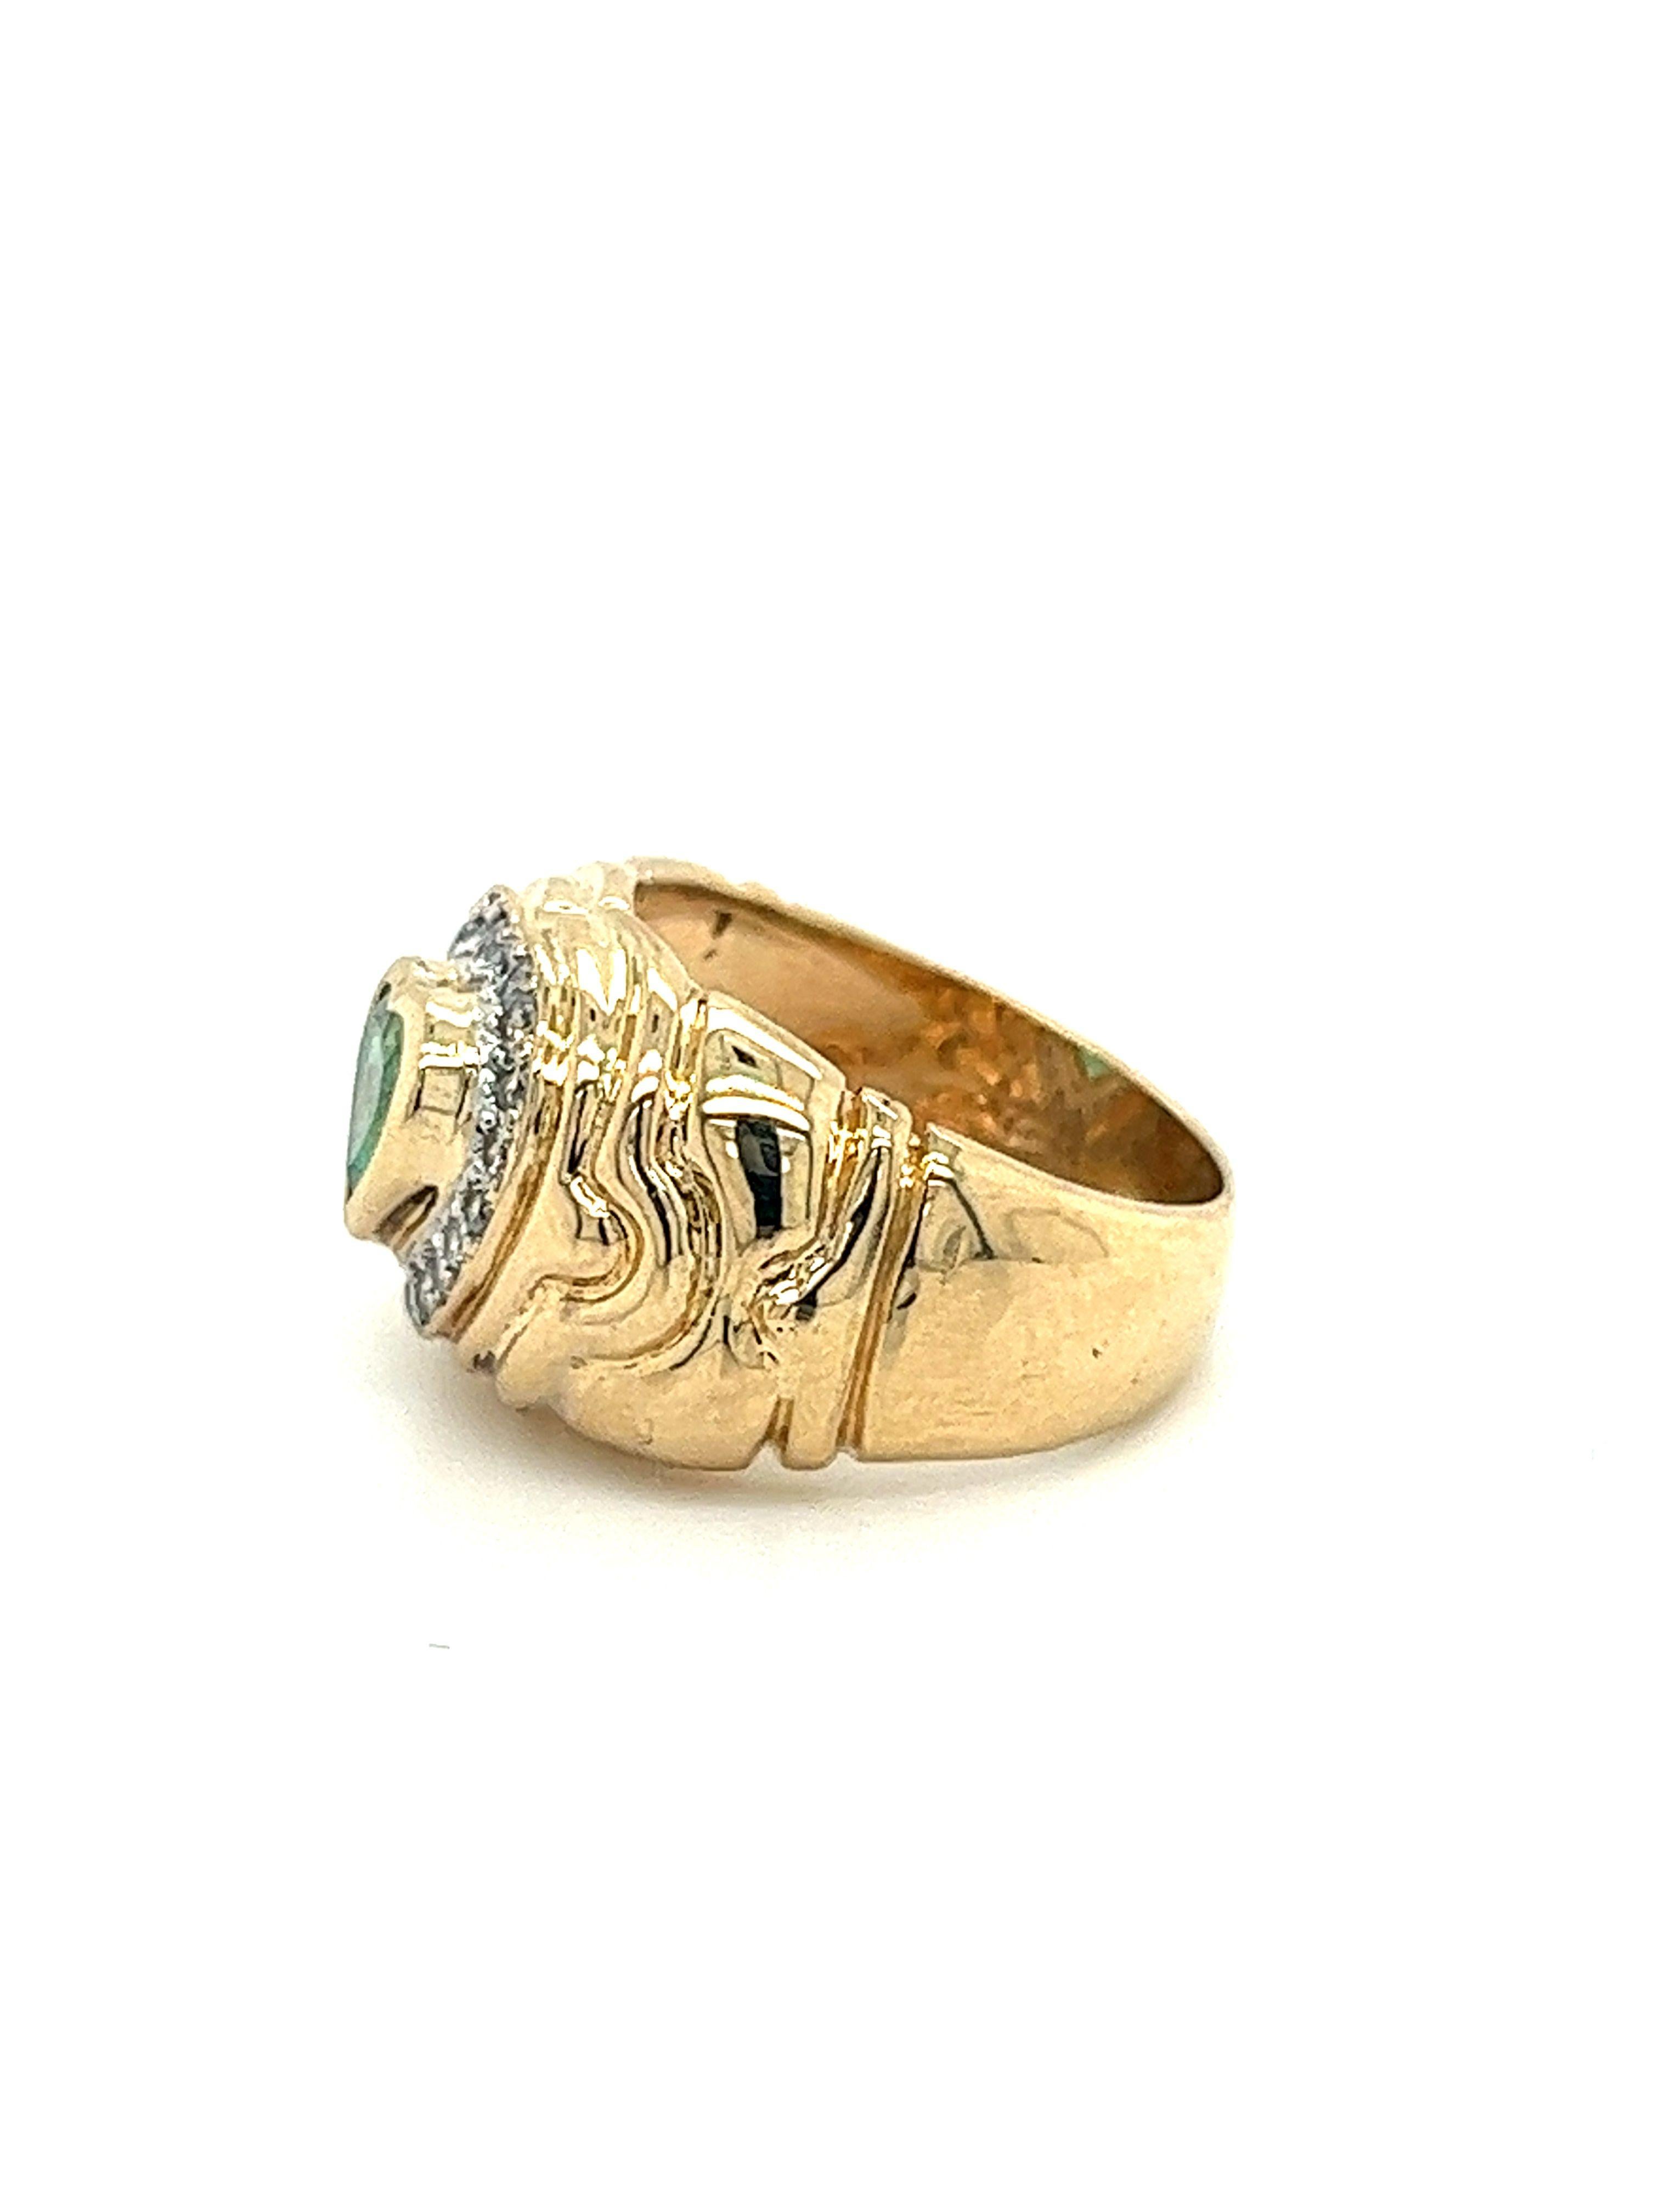 Romantic 14k Solid Gold Heart Shape Emerald & Diamond Thick Pinky Ring with Textured Gold For Sale